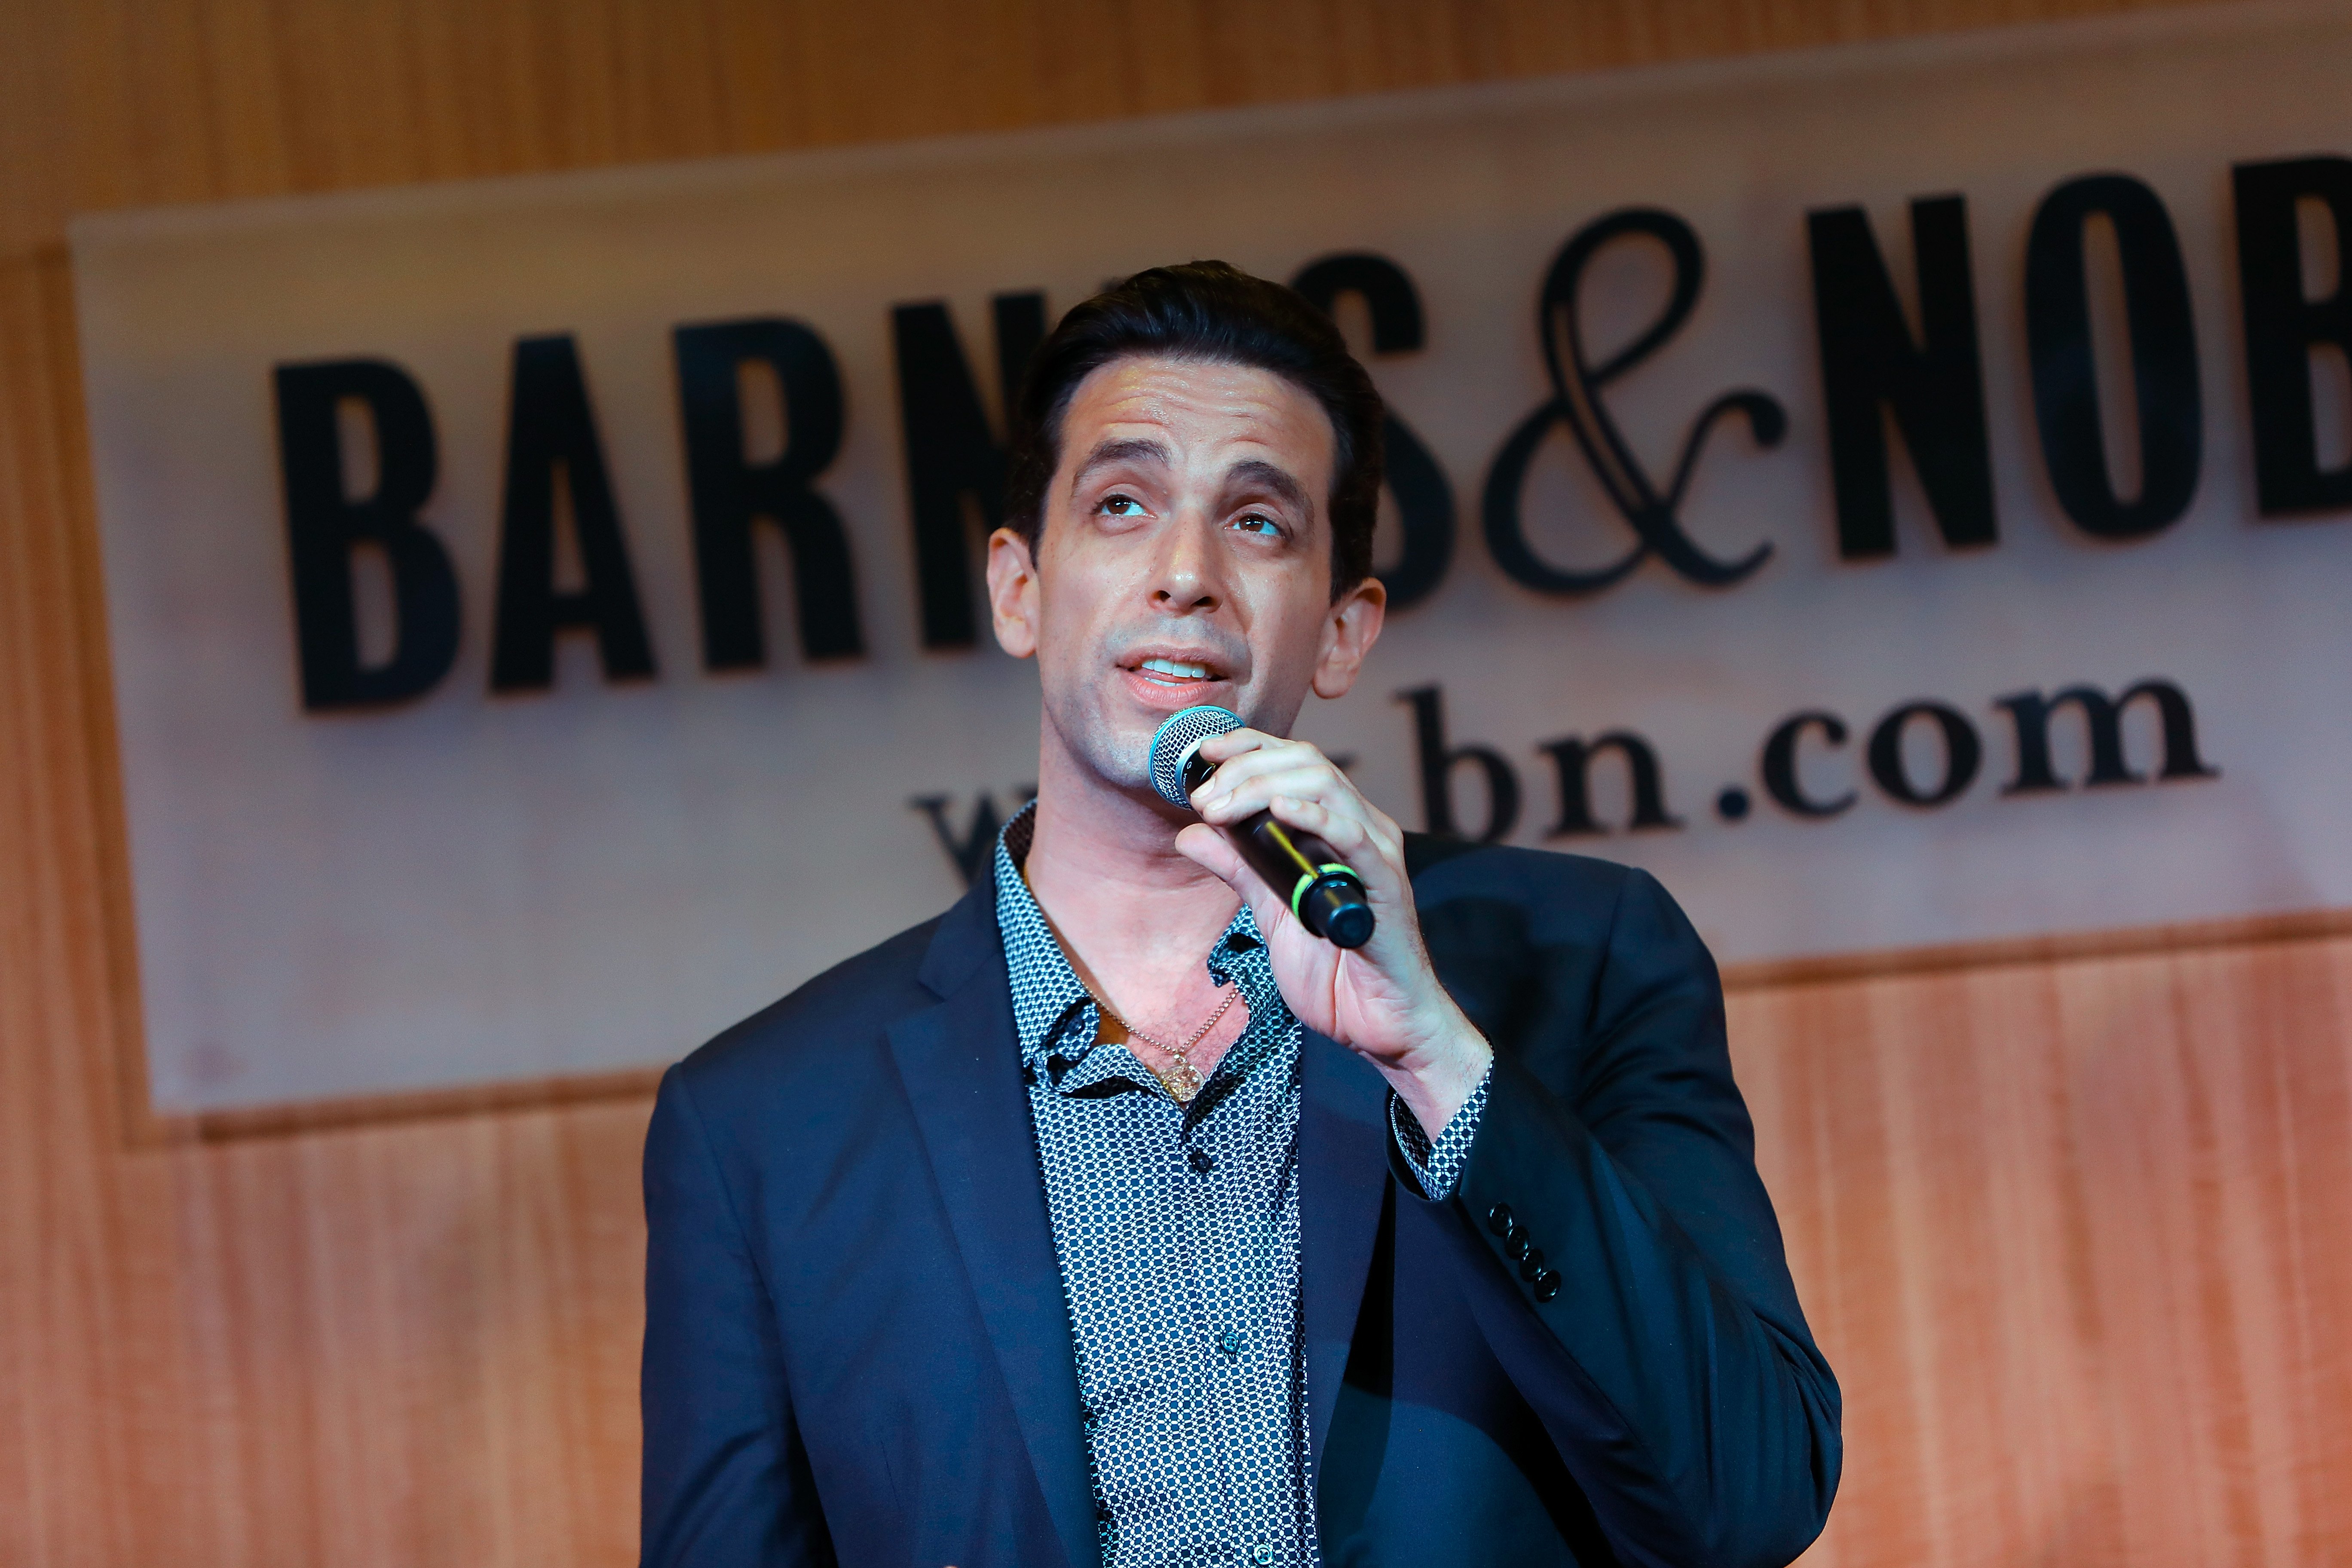 Broadway actor Nick Cordero performs a soundtrack from the Broadway show "A Bronx Tale" in Barnes & Nobles in New York in 2018. | Photo: Getty Images